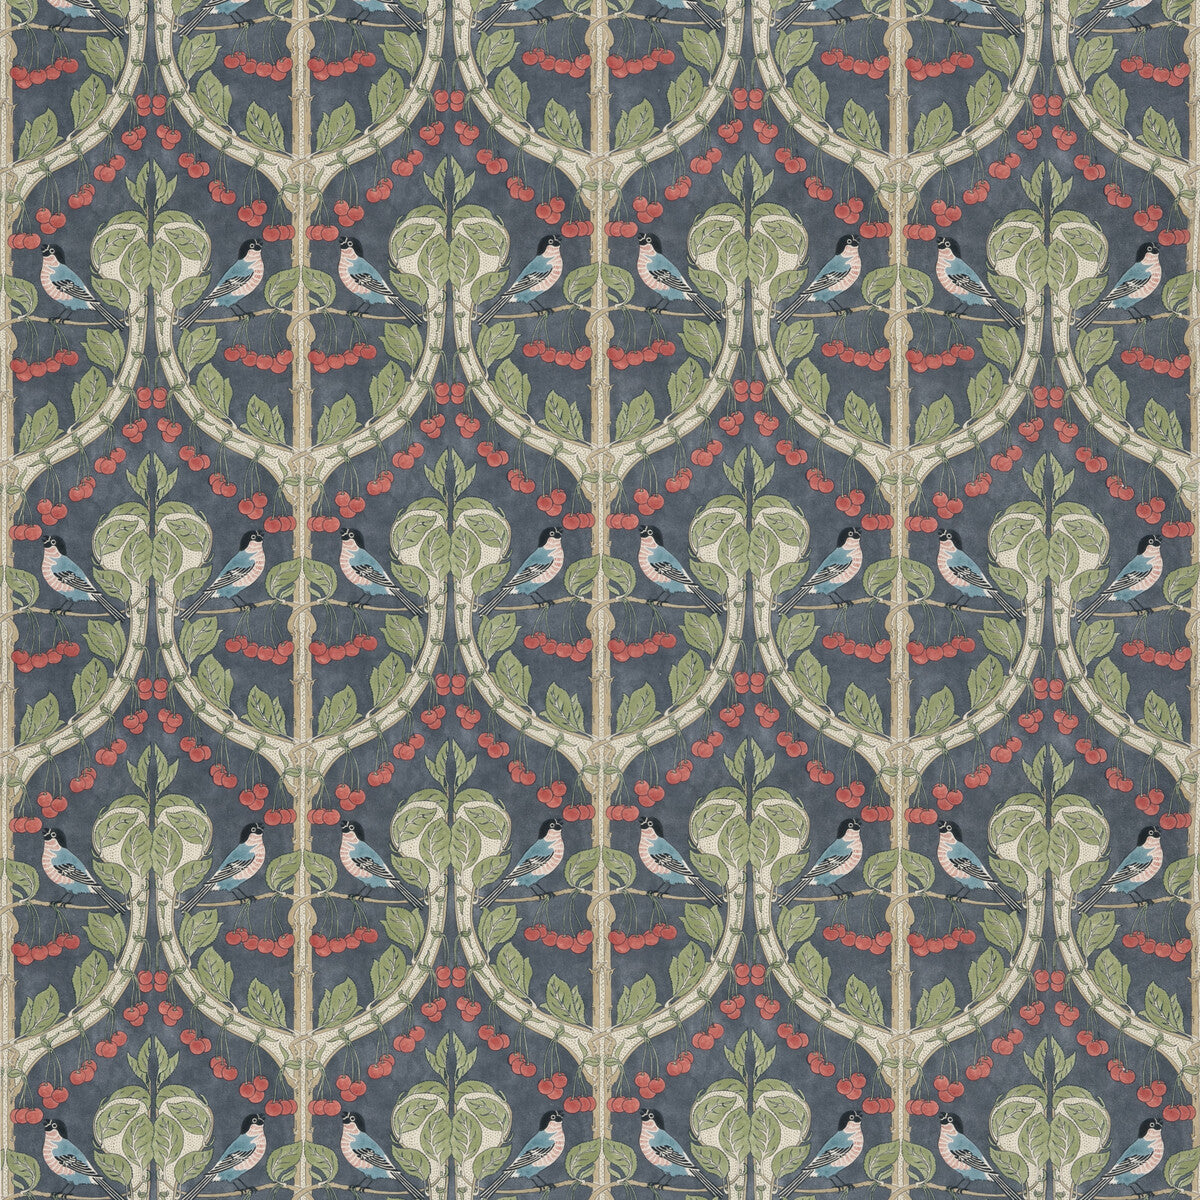 Birds &amp; Cherries Cotton fabric in indigo color - pattern BP10967.2.0 - by G P &amp; J Baker in the Original Brantwood Fabric collection